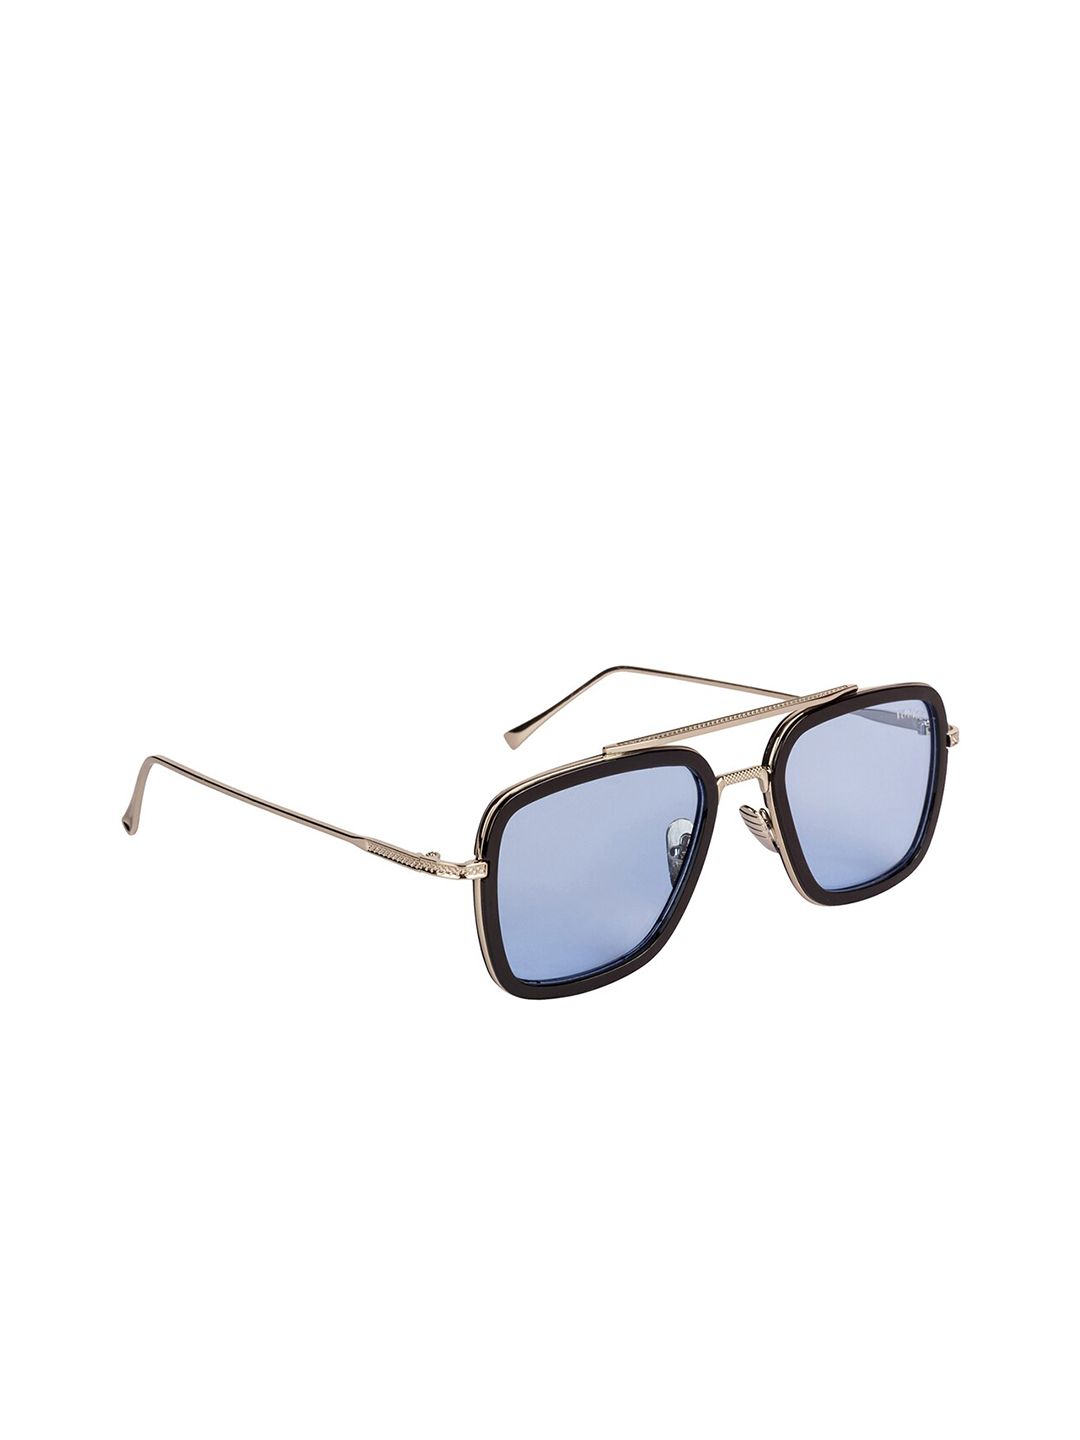 Voyage Unisex Blue Lens & Silver-Toned Square Sunglasses with UV Protected Lens Price in India